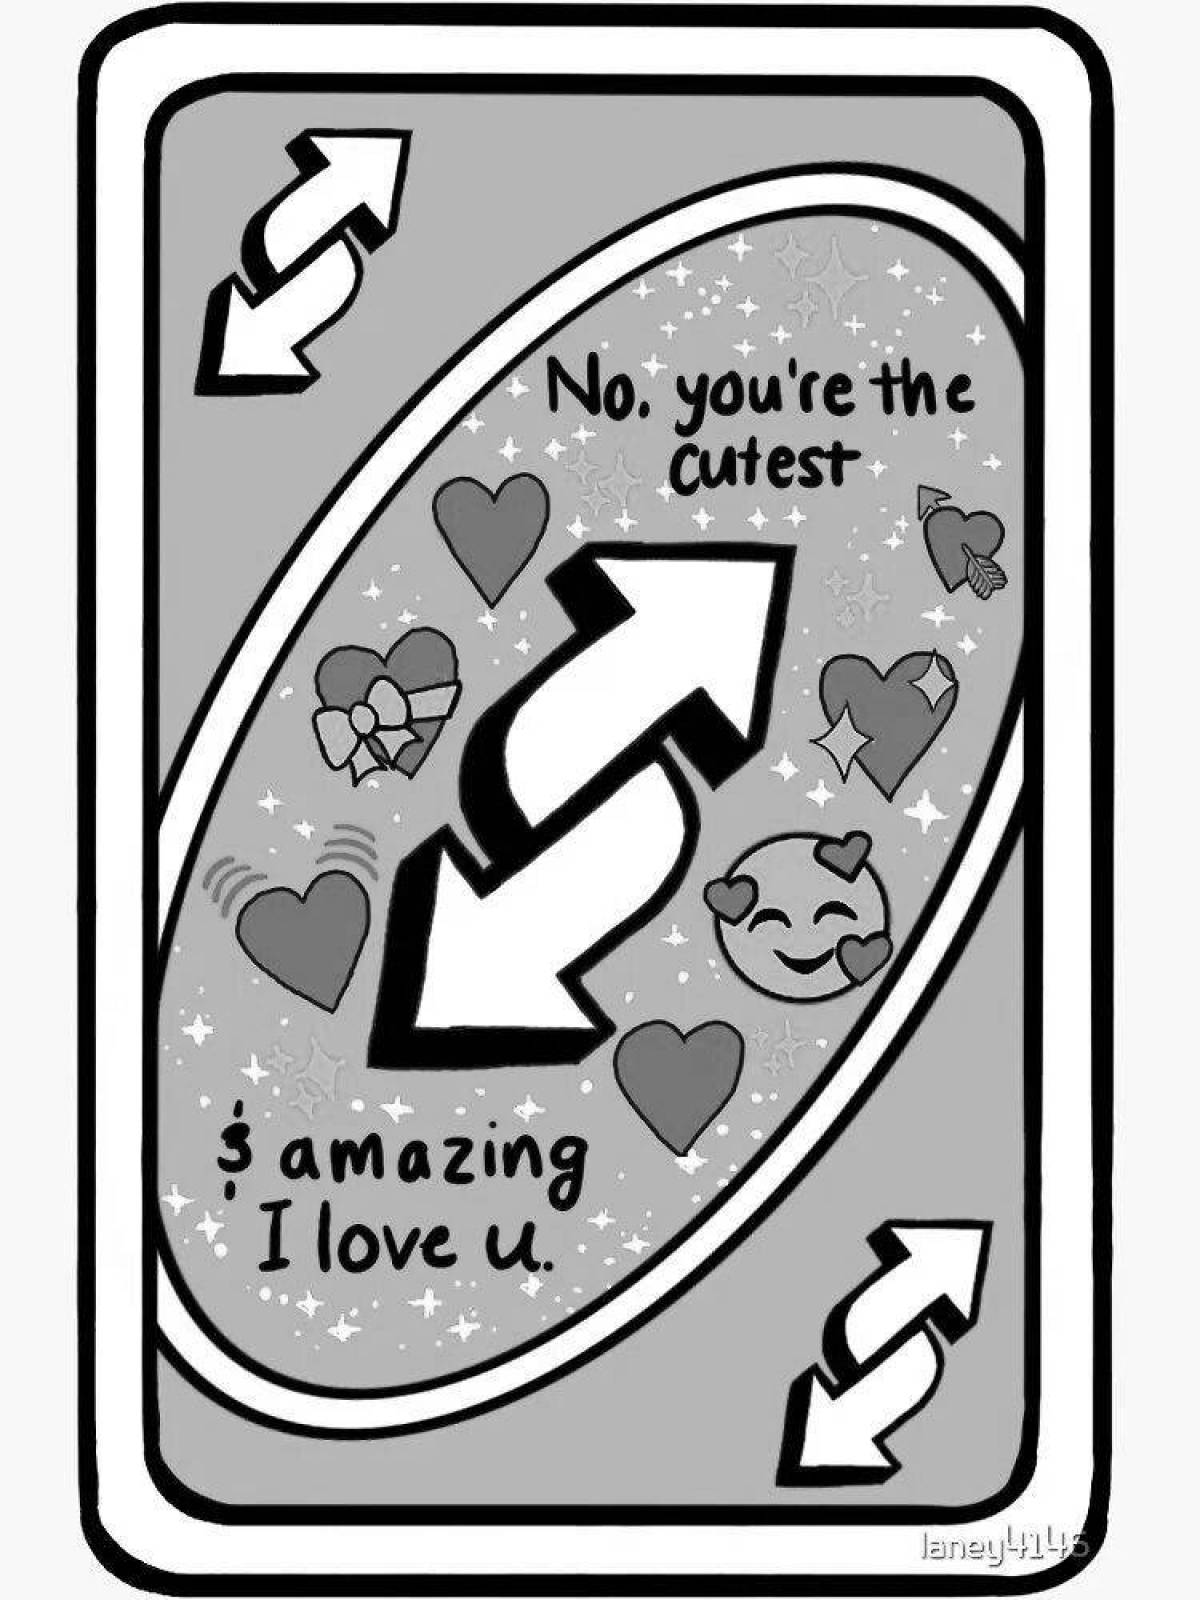 Colorful uno card with hearts